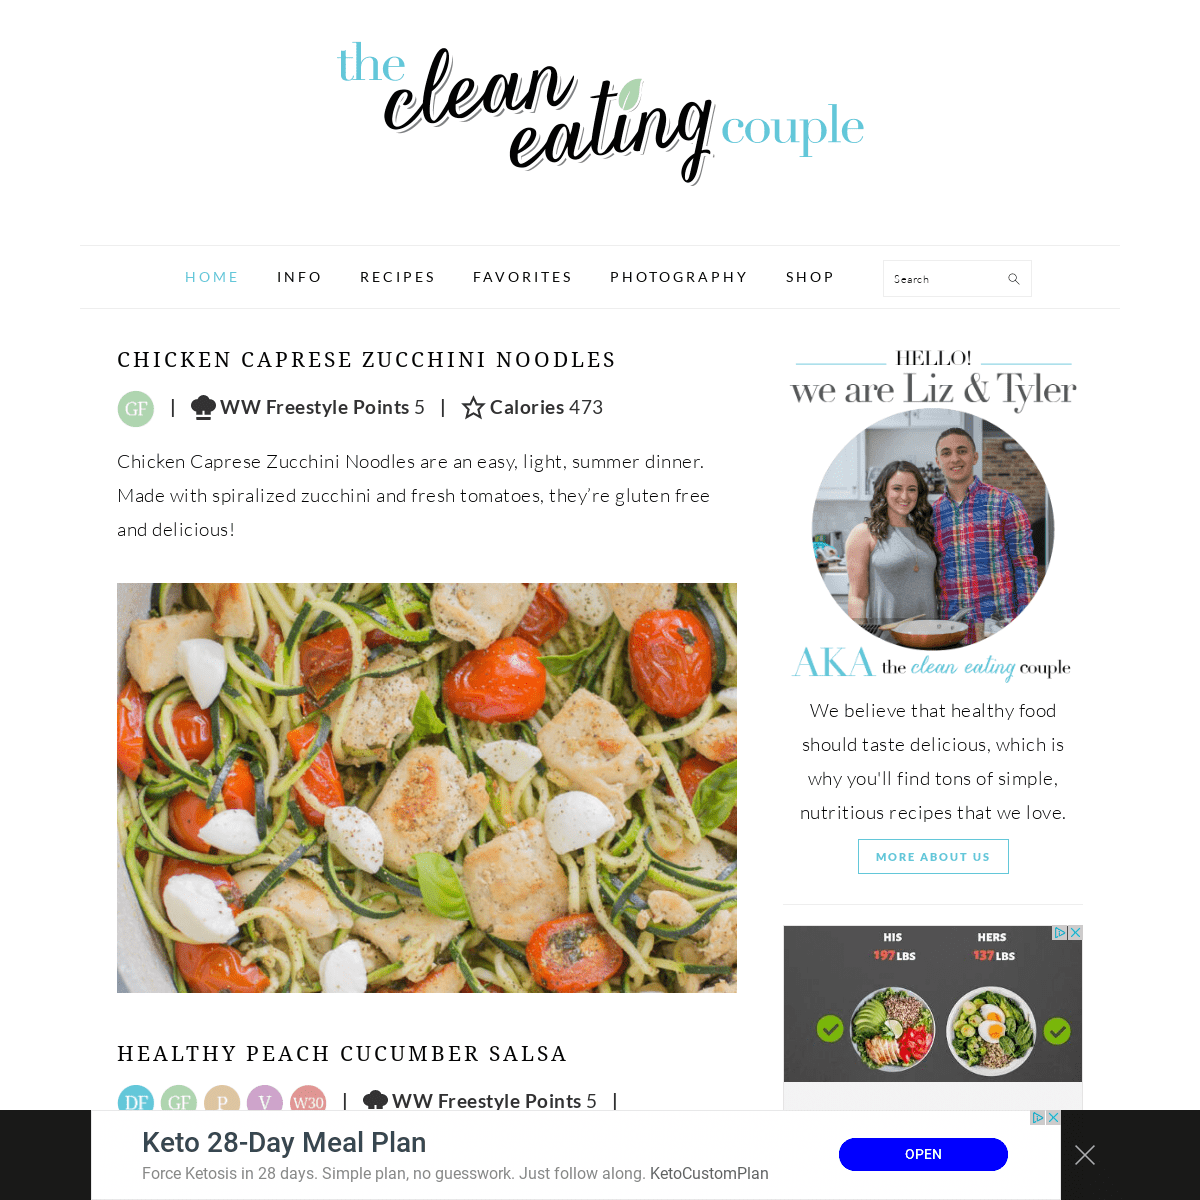 Paleo, Gluten-Free, Whole30 & Simple Recipes - The Clean Eating Couple